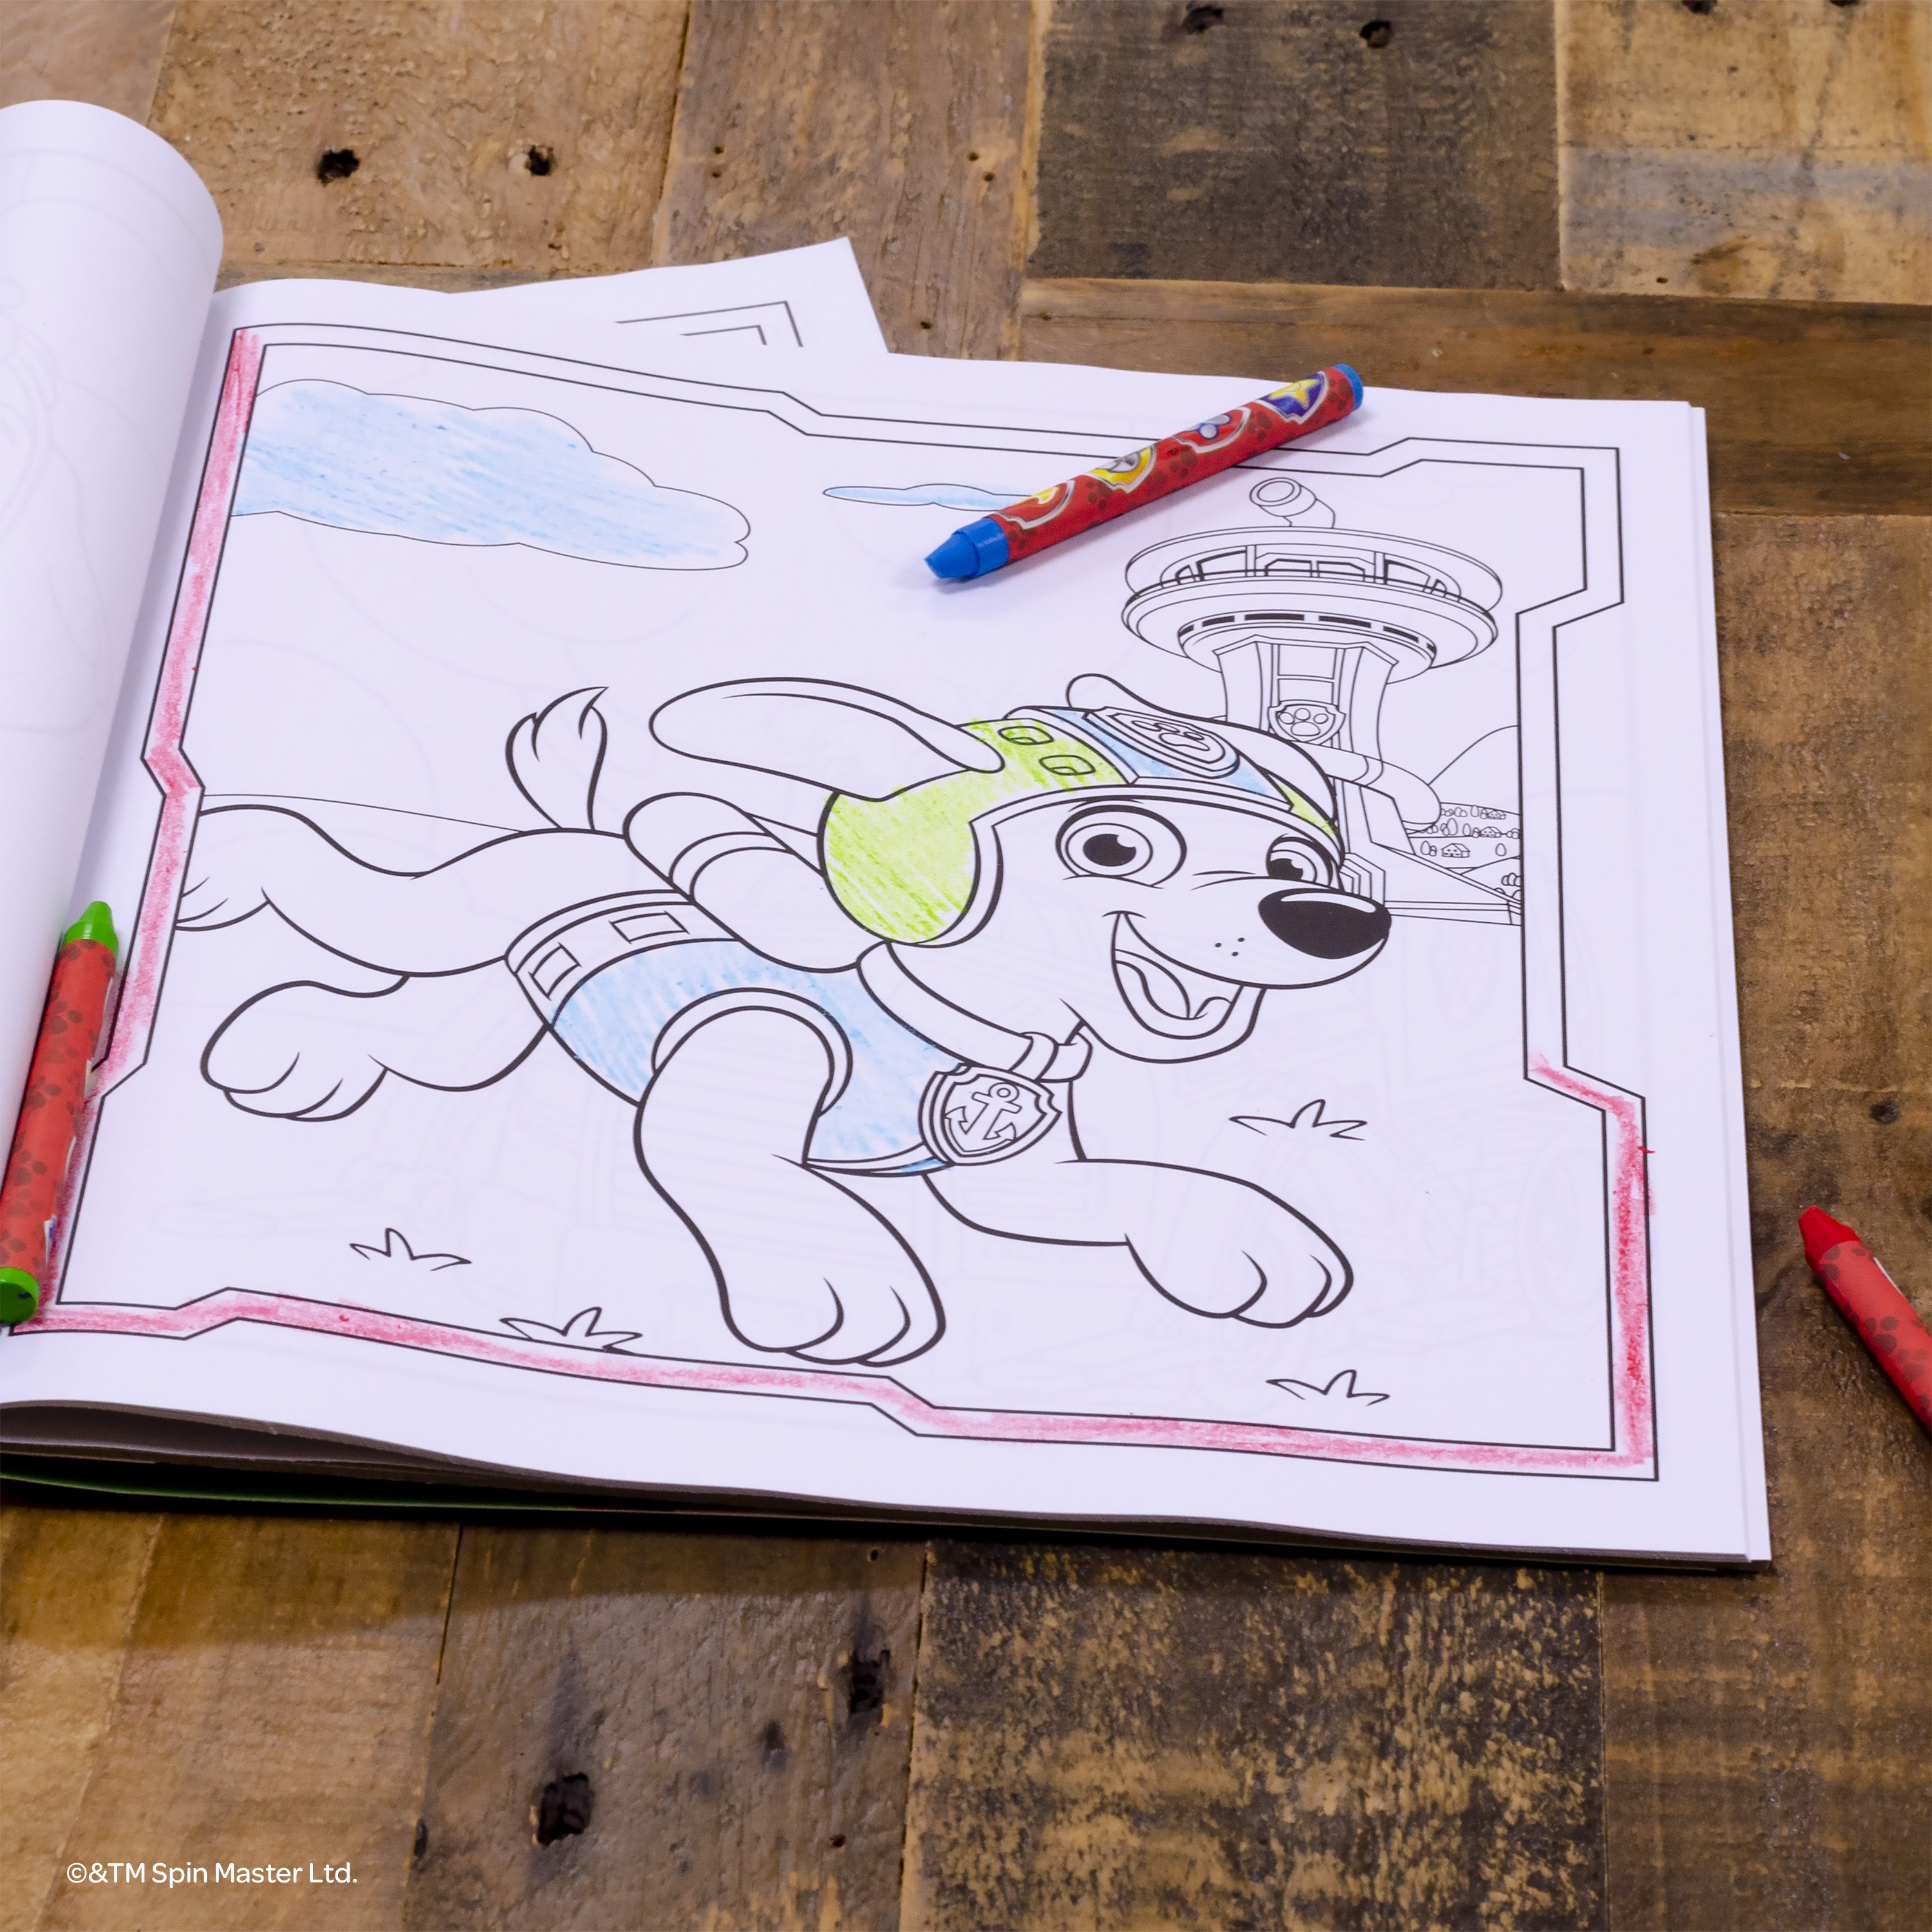 PAW Patrol World Of Art & Activity Kit with an Imagine Ink Book - image 5 of 8